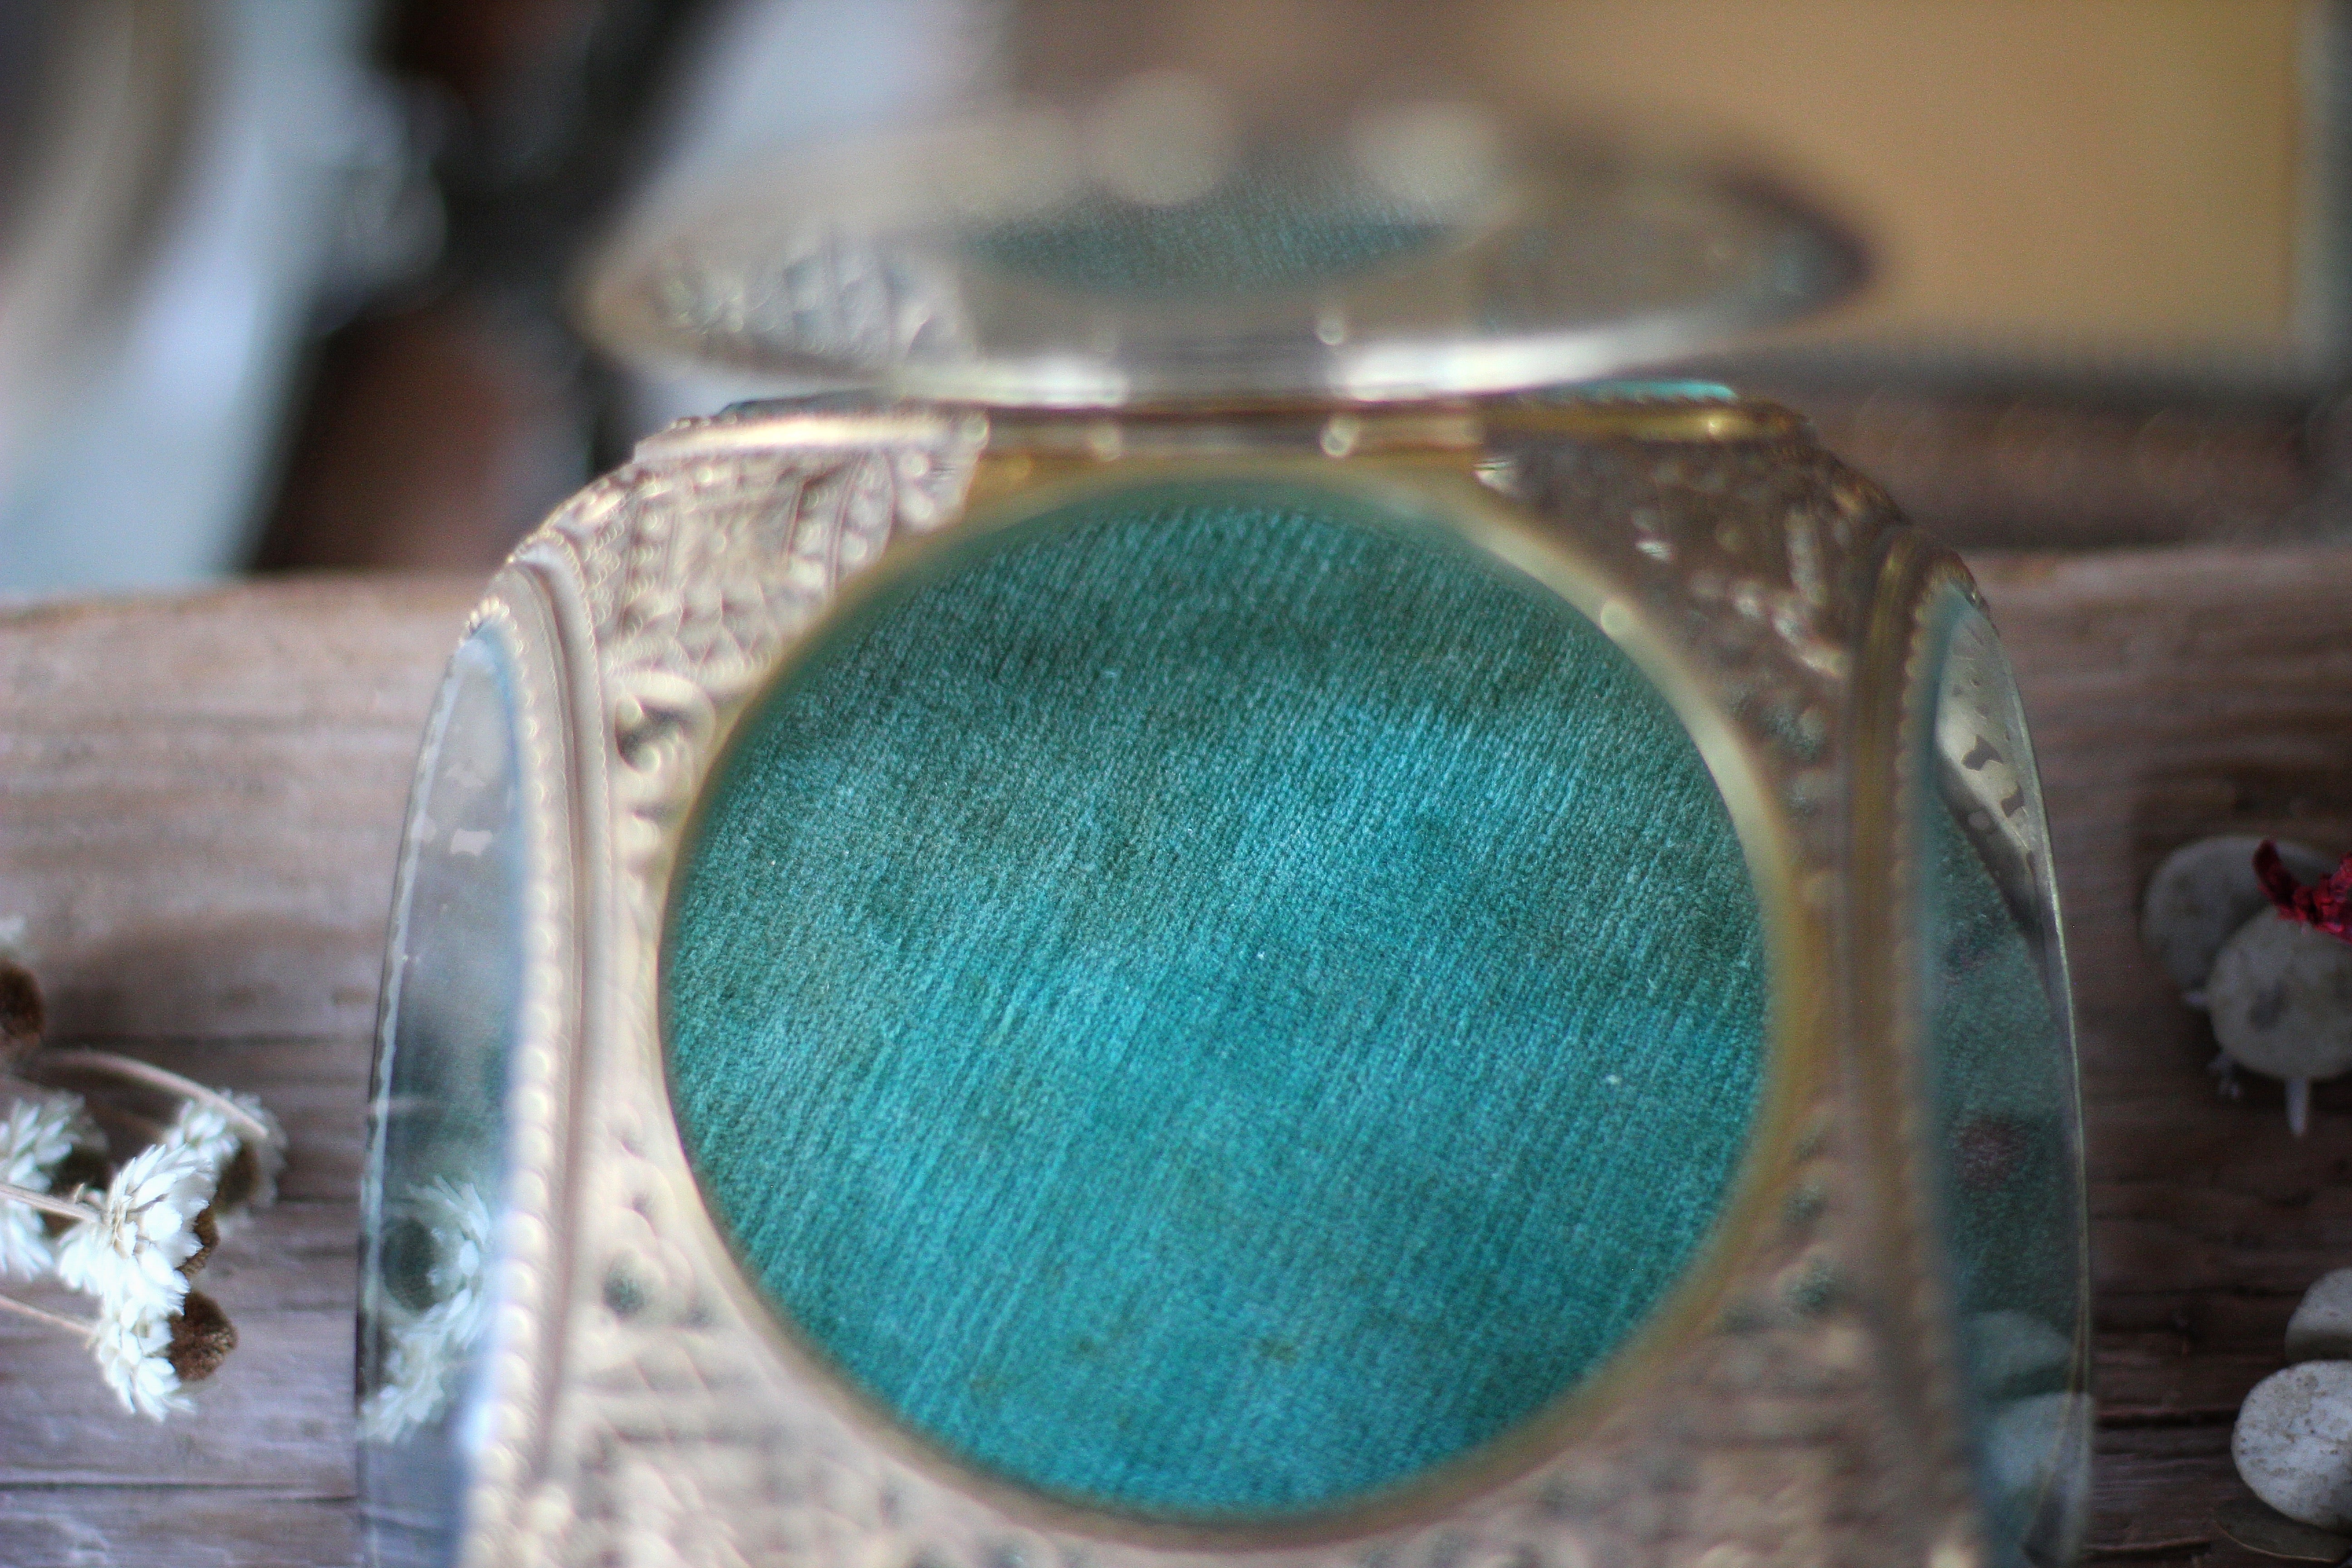 Antique Teal Jewelry Box